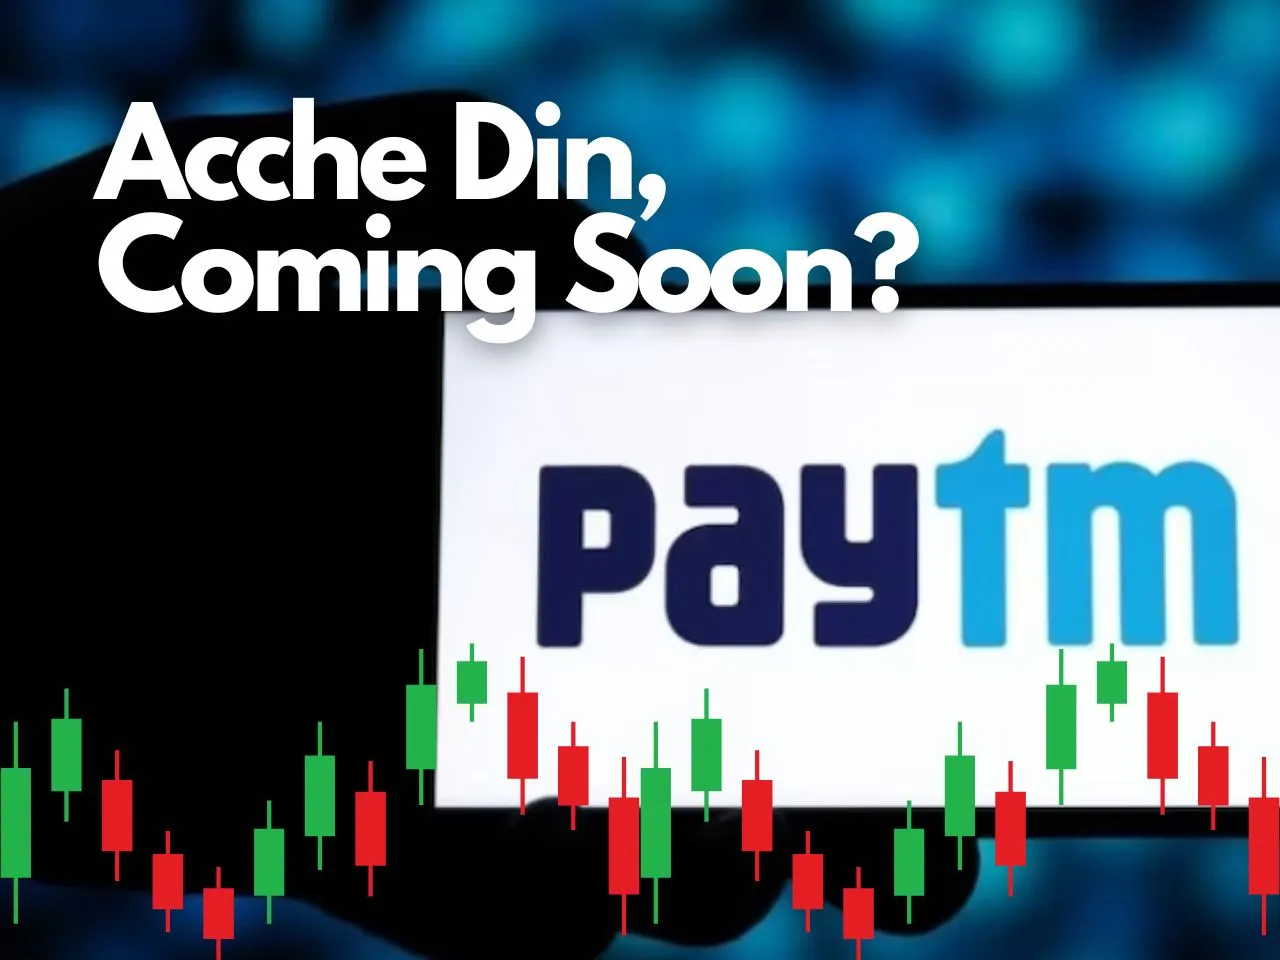 Paytm Share Surge Is the Hard Time Over for Paytm